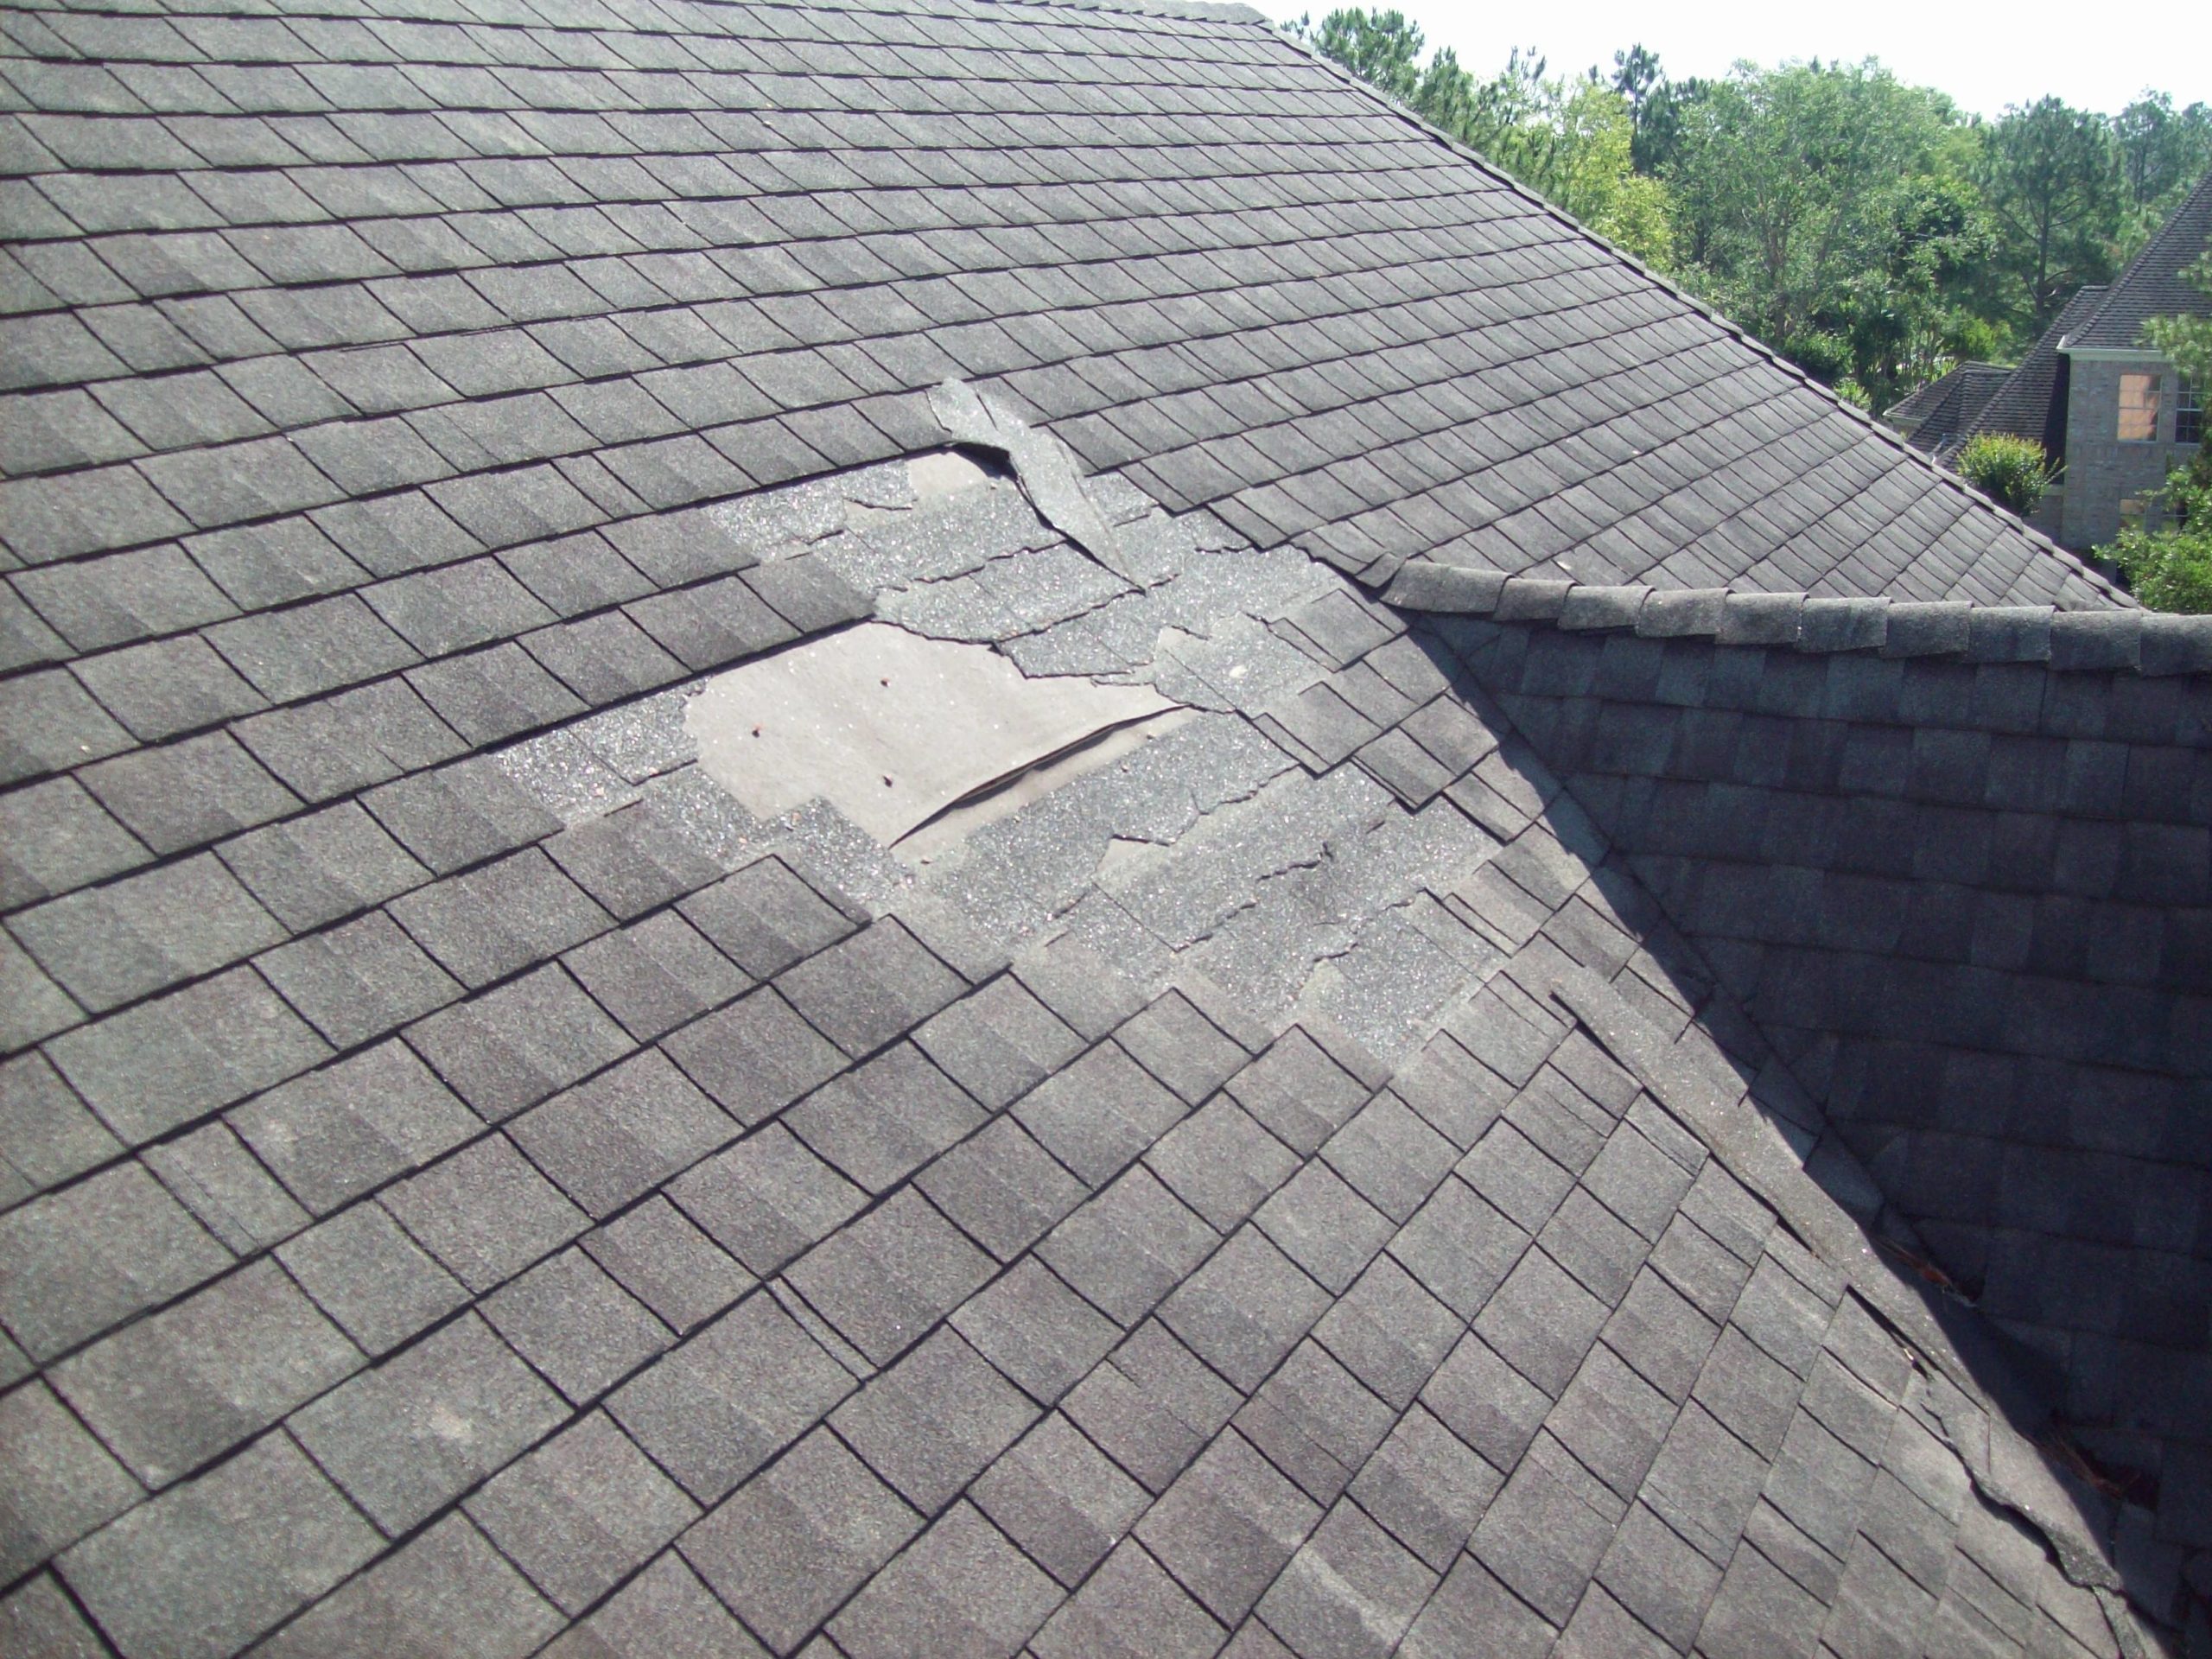 An image of a residential roof with gray asohalt shingles. The shingles have been damaged in a storm and some are missing.